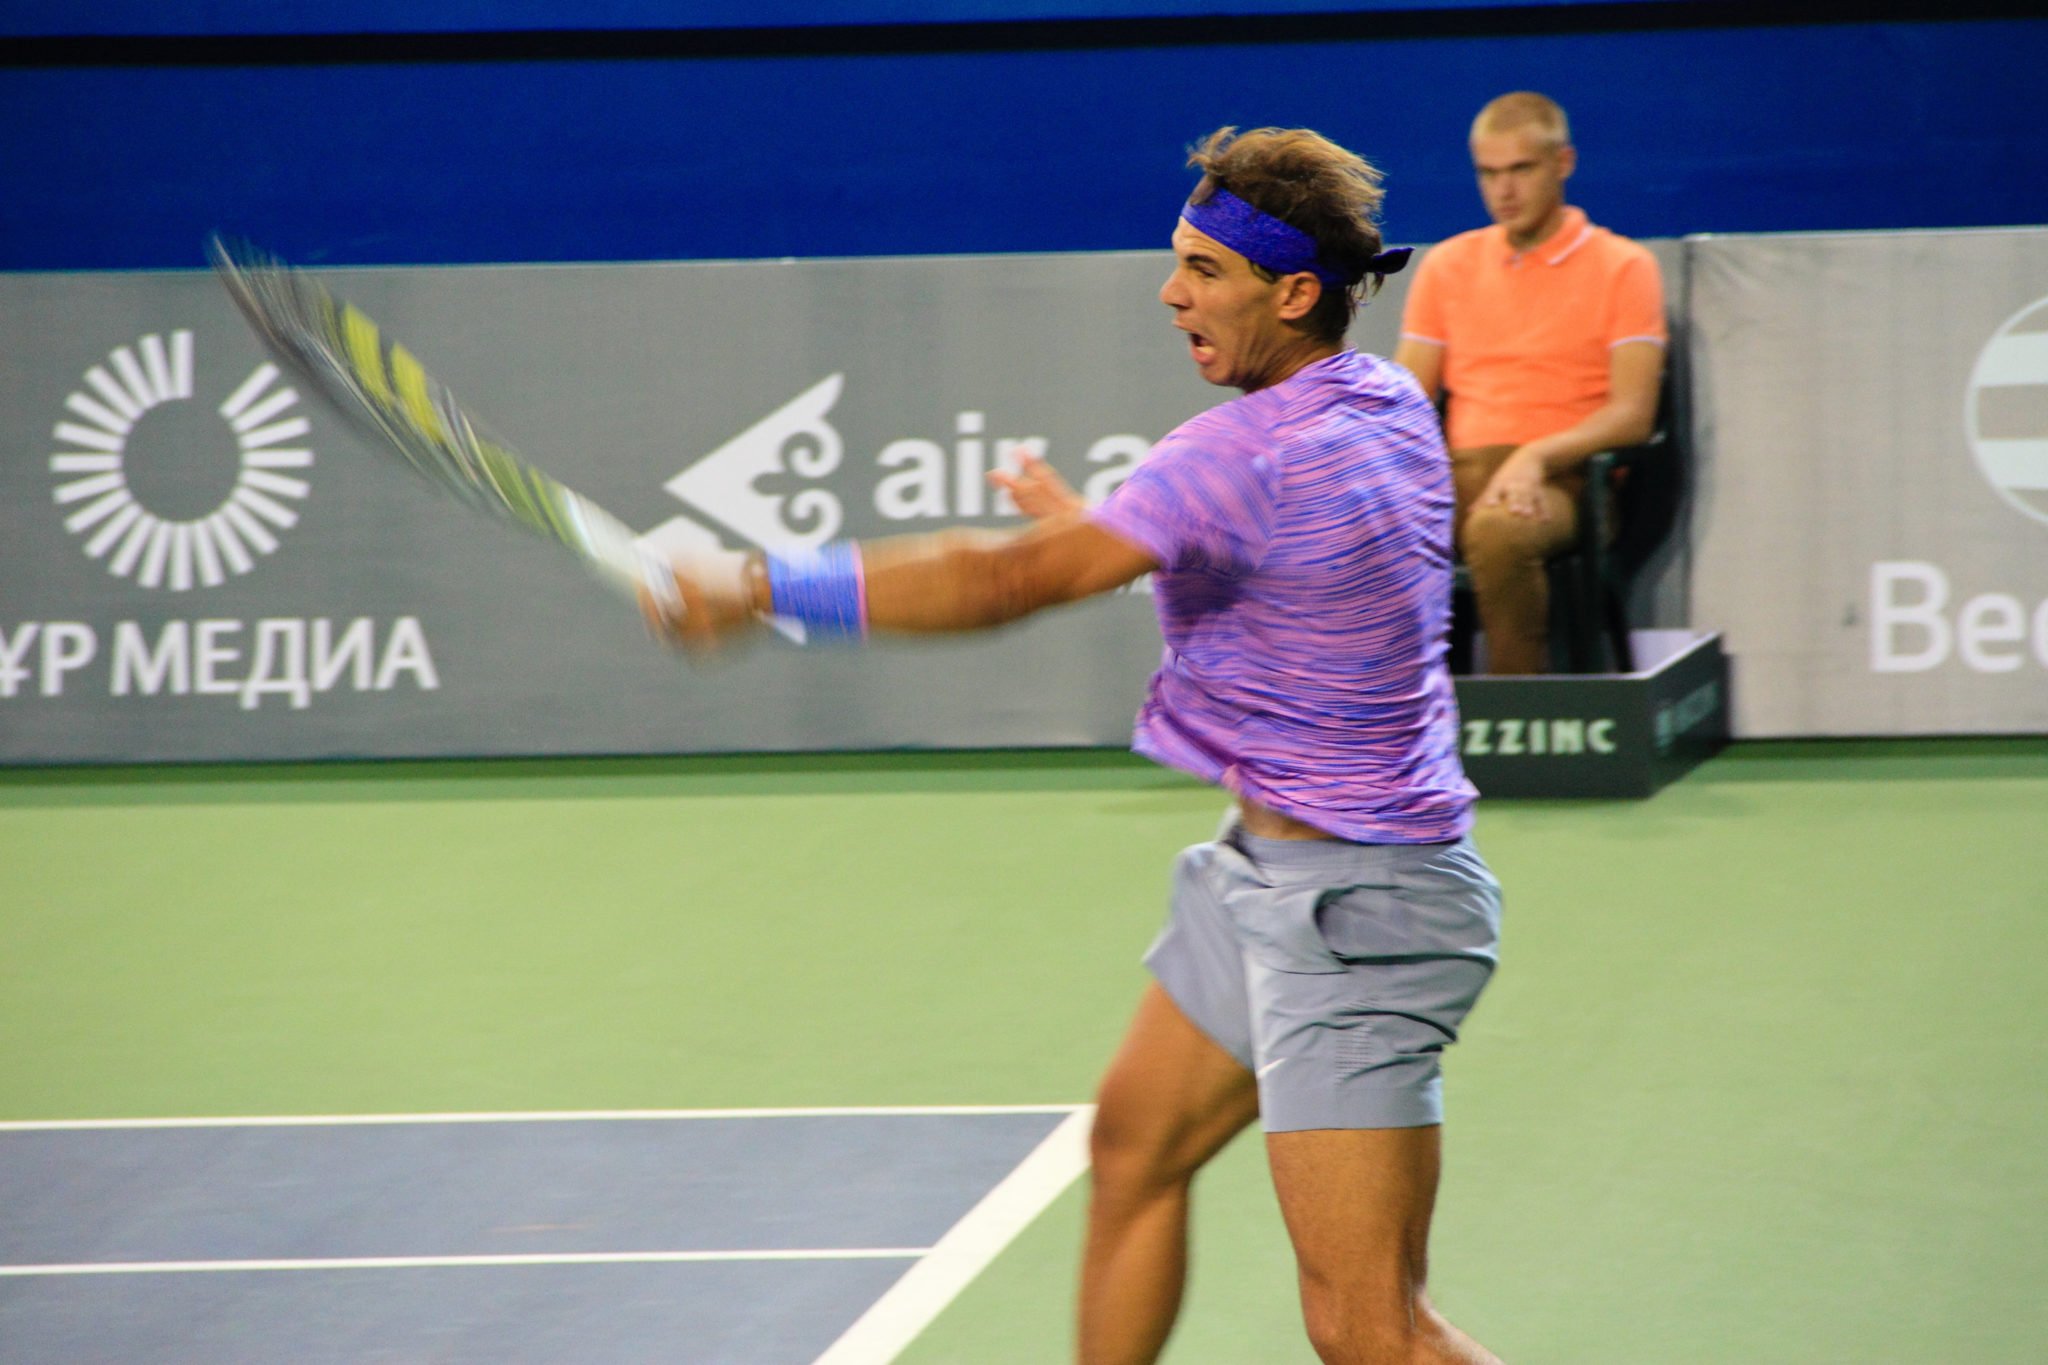 Rafael Nadal will compete at the Citi Open. Photo by Flickr user Tanya Cicconte.